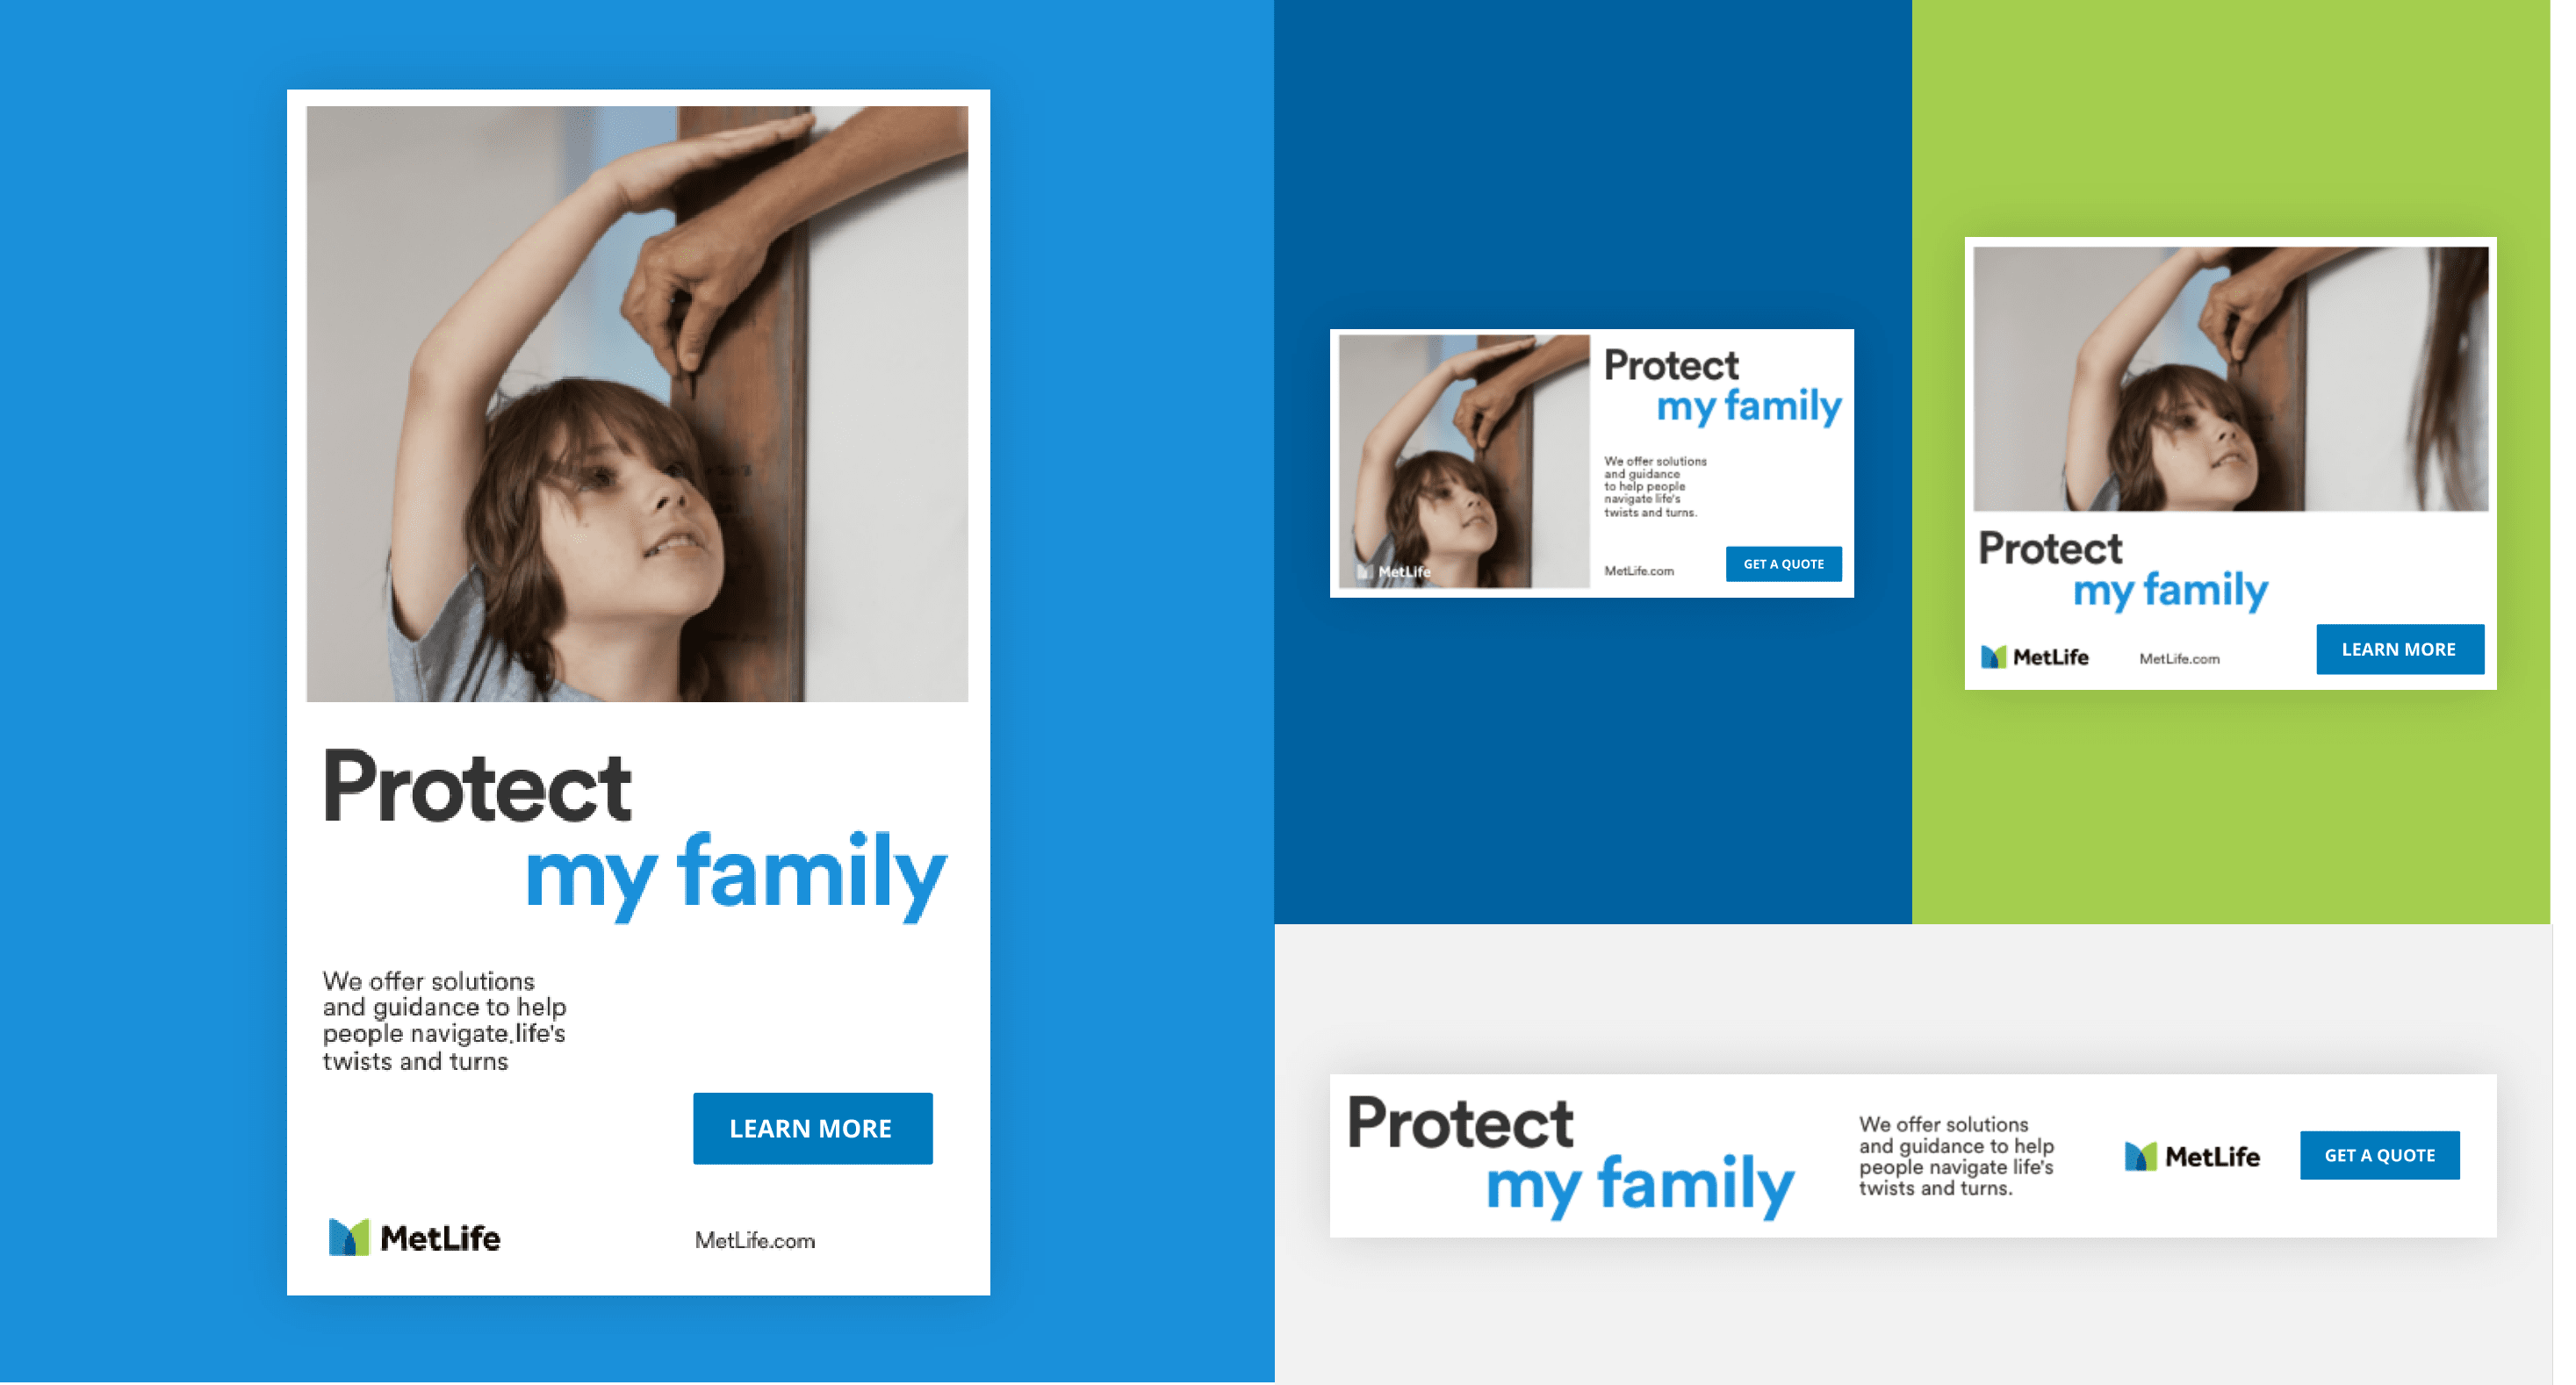 An array of online ads using photography and text: Protect my family.